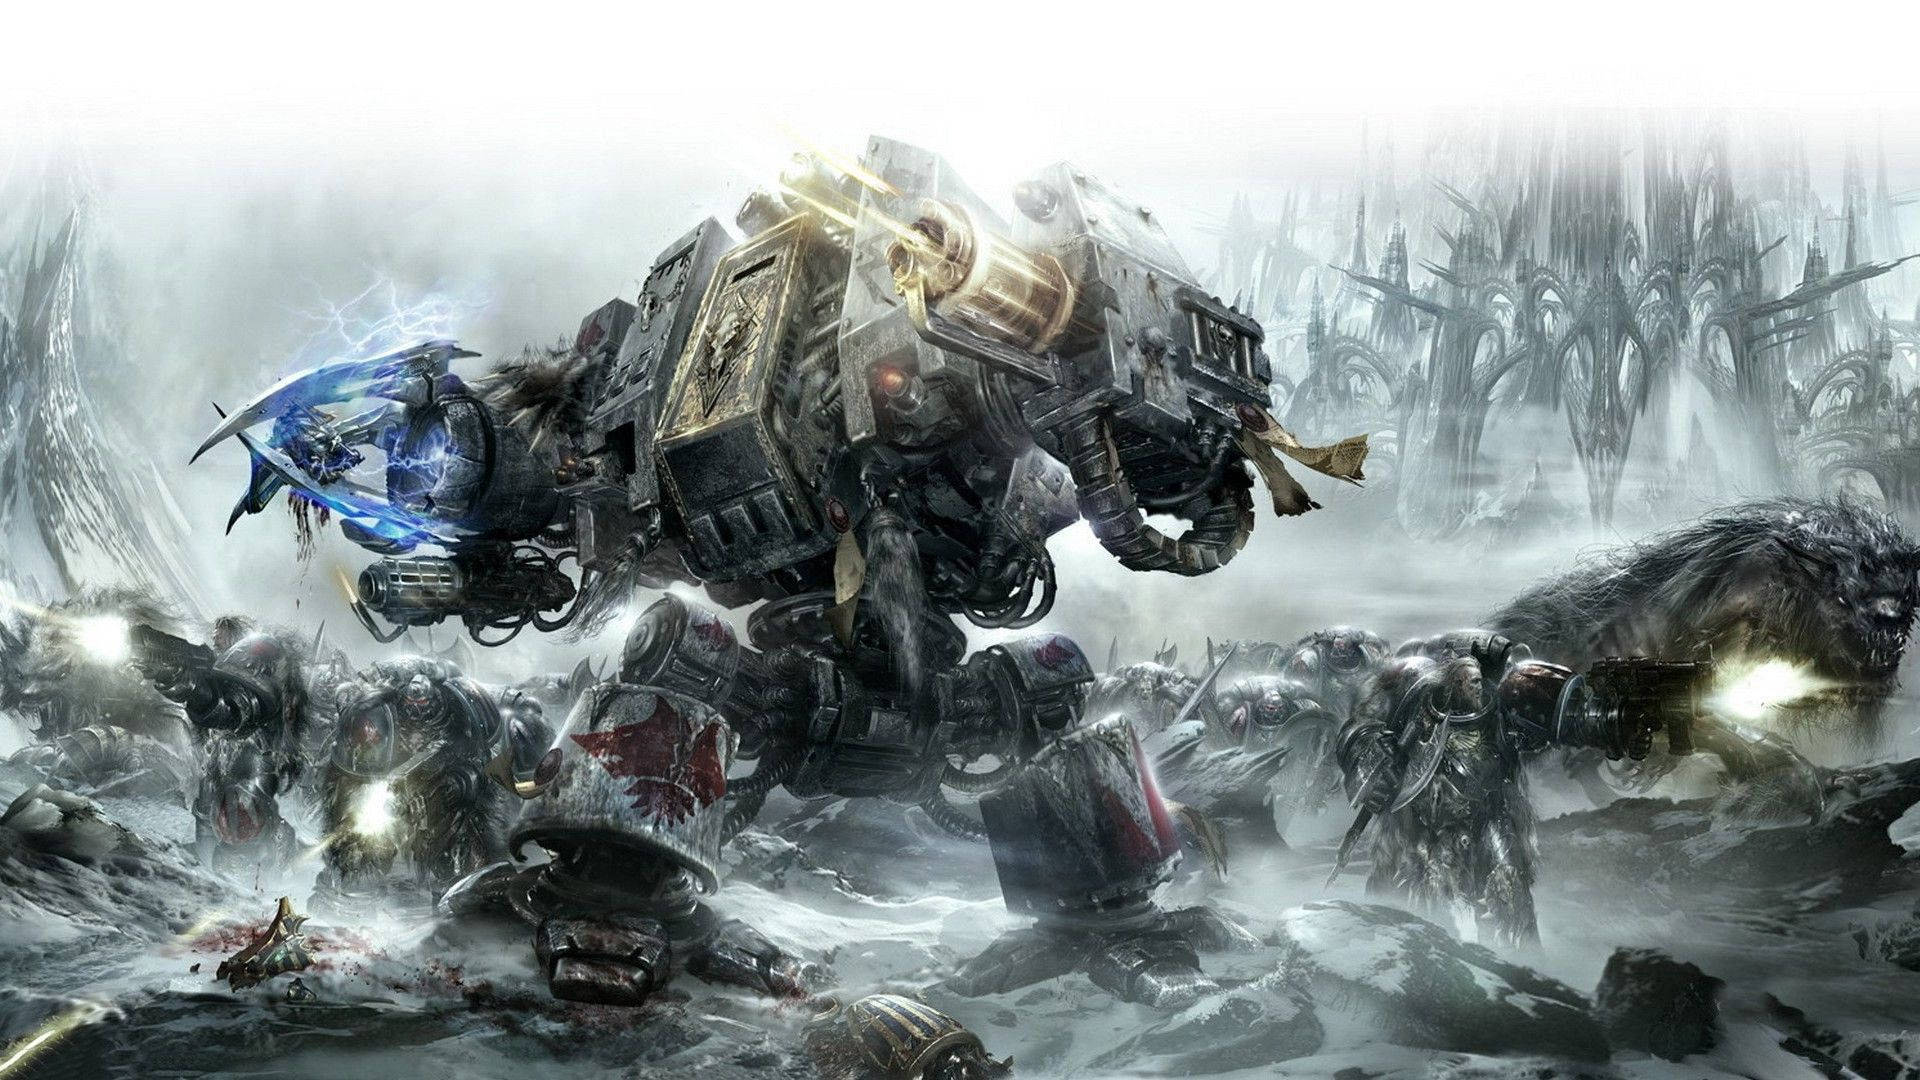 "A Space Wolves Space Marine readies for battle in the 41st millennium" Wallpaper